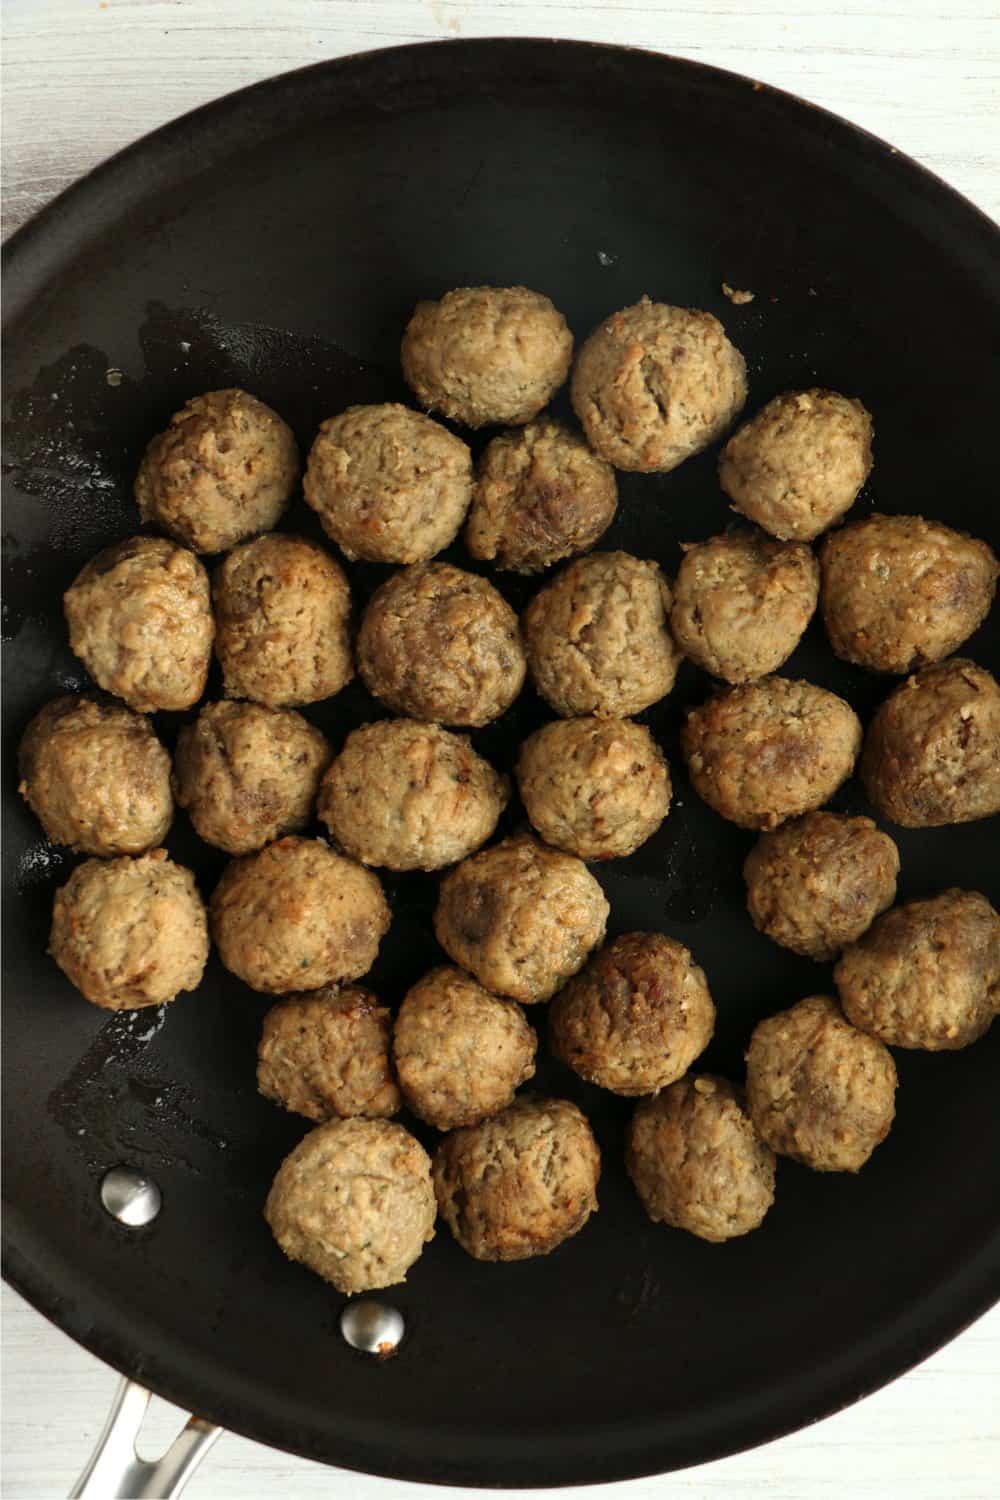 Cooked meatballs in a pan